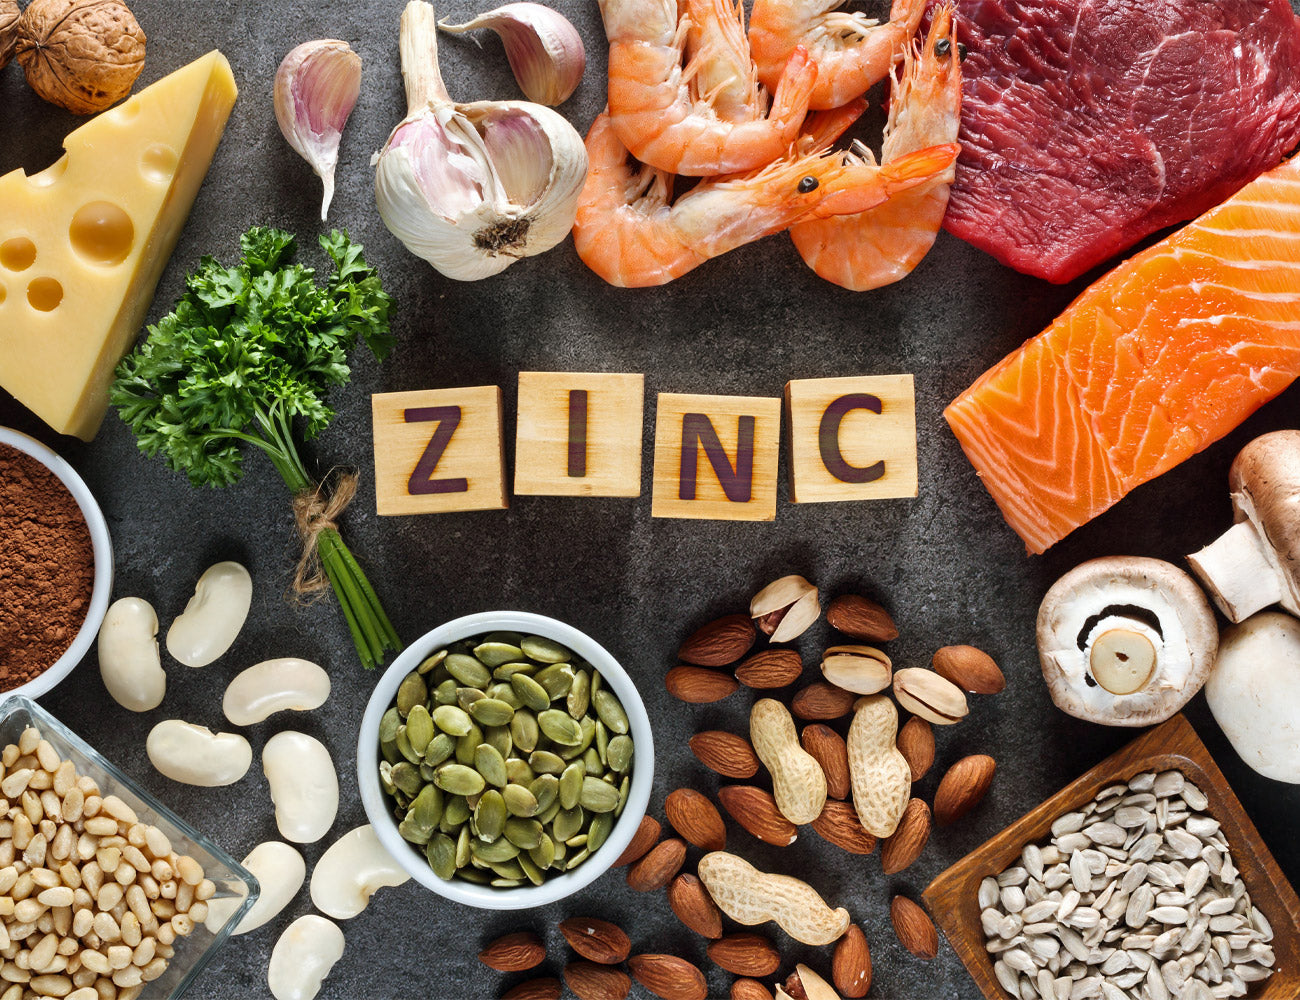 More Zing With Zinc - What Is It & Why Do We Need It?